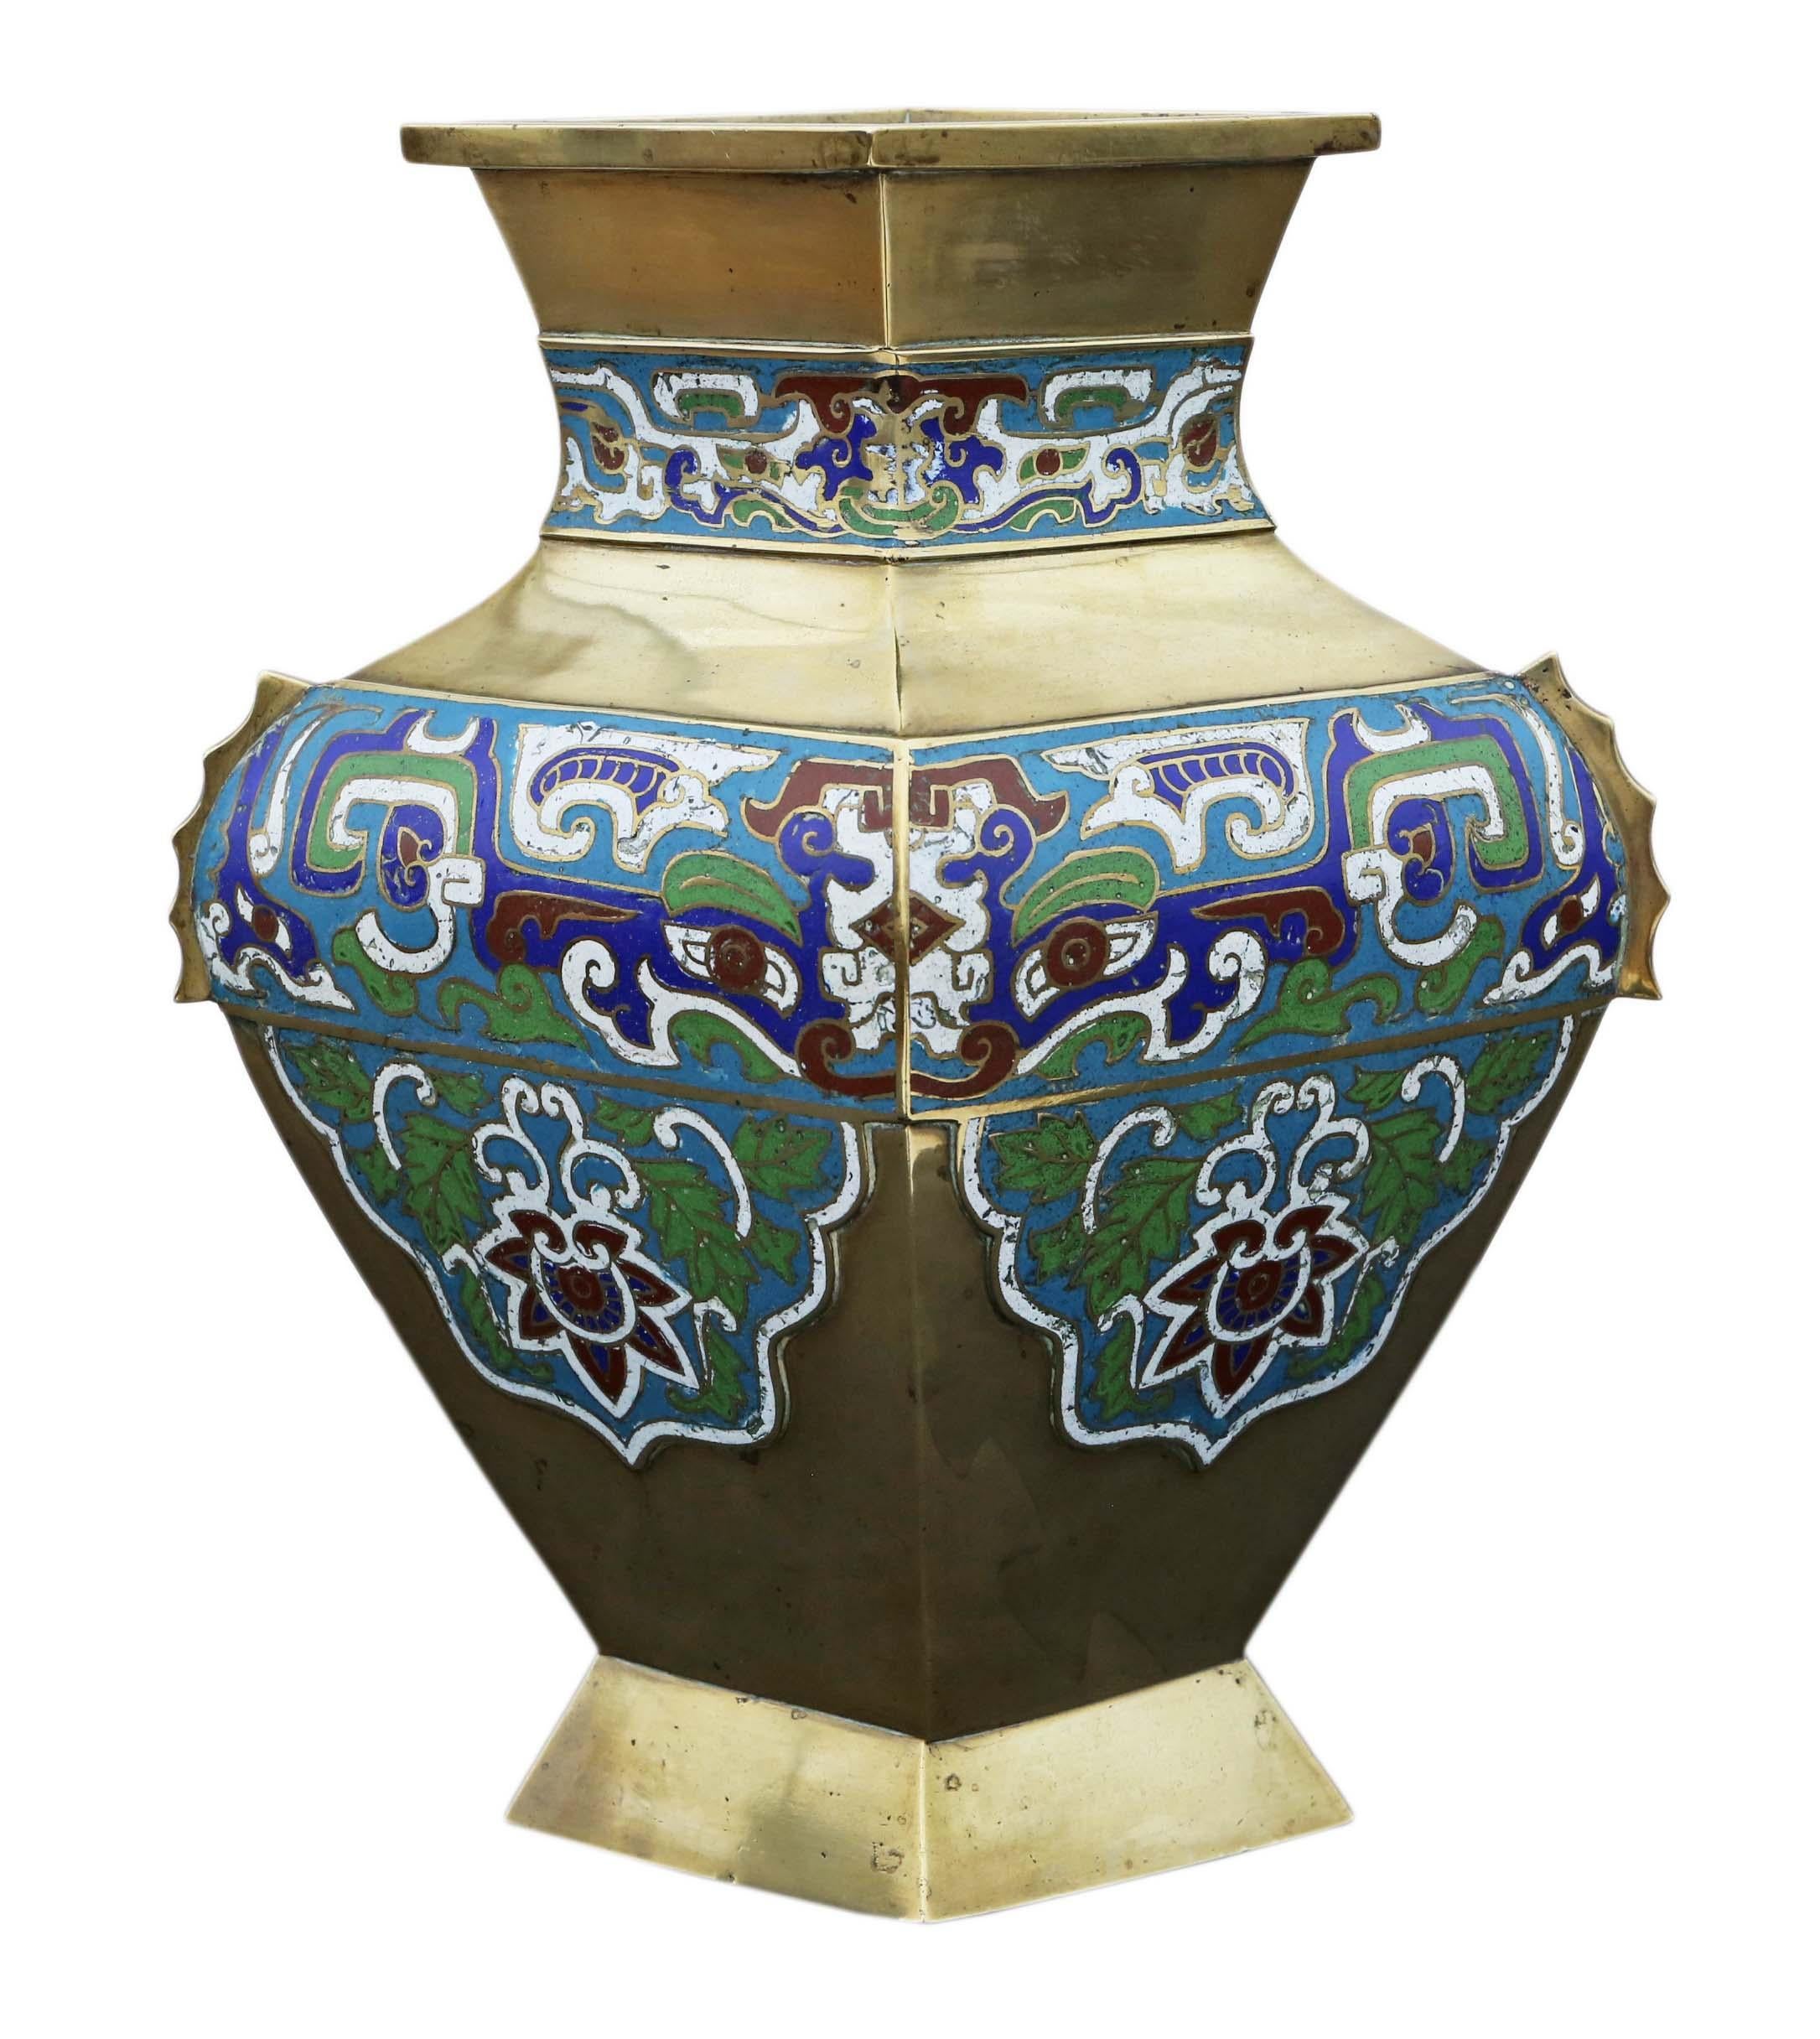 Antique Large Chinese Brass Bronze Champleve Enamel Vase In Good Condition For Sale In Wisbech, Cambridgeshire